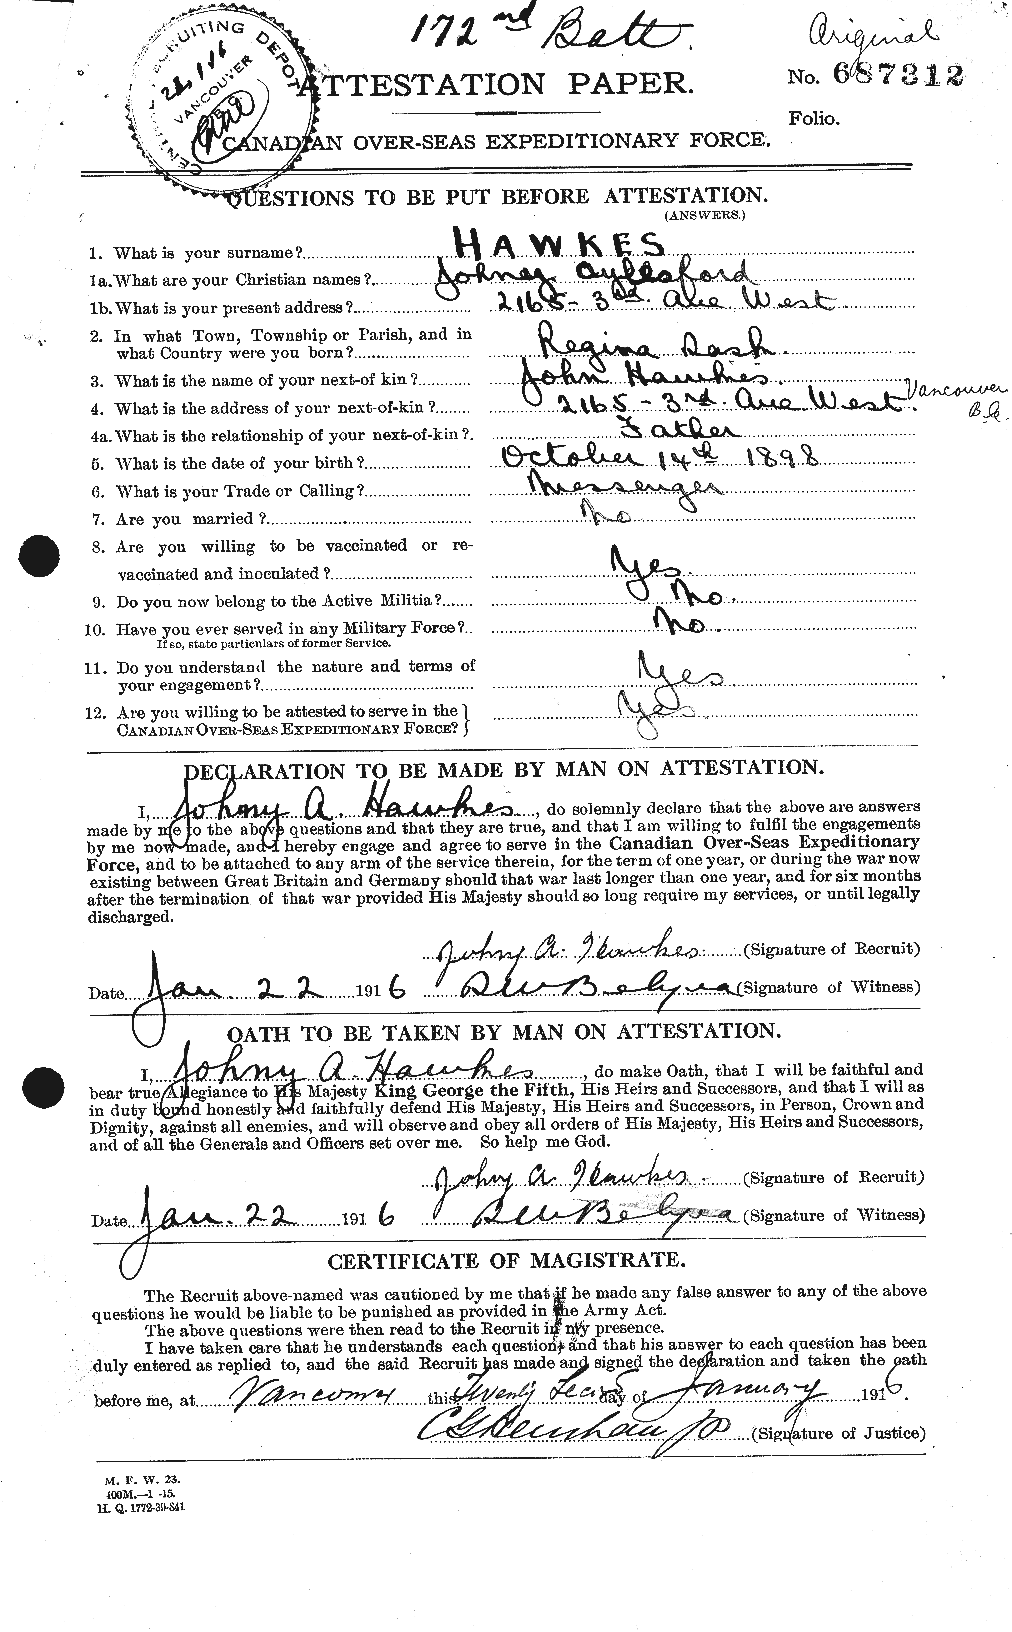 Personnel Records of the First World War - CEF 384551a